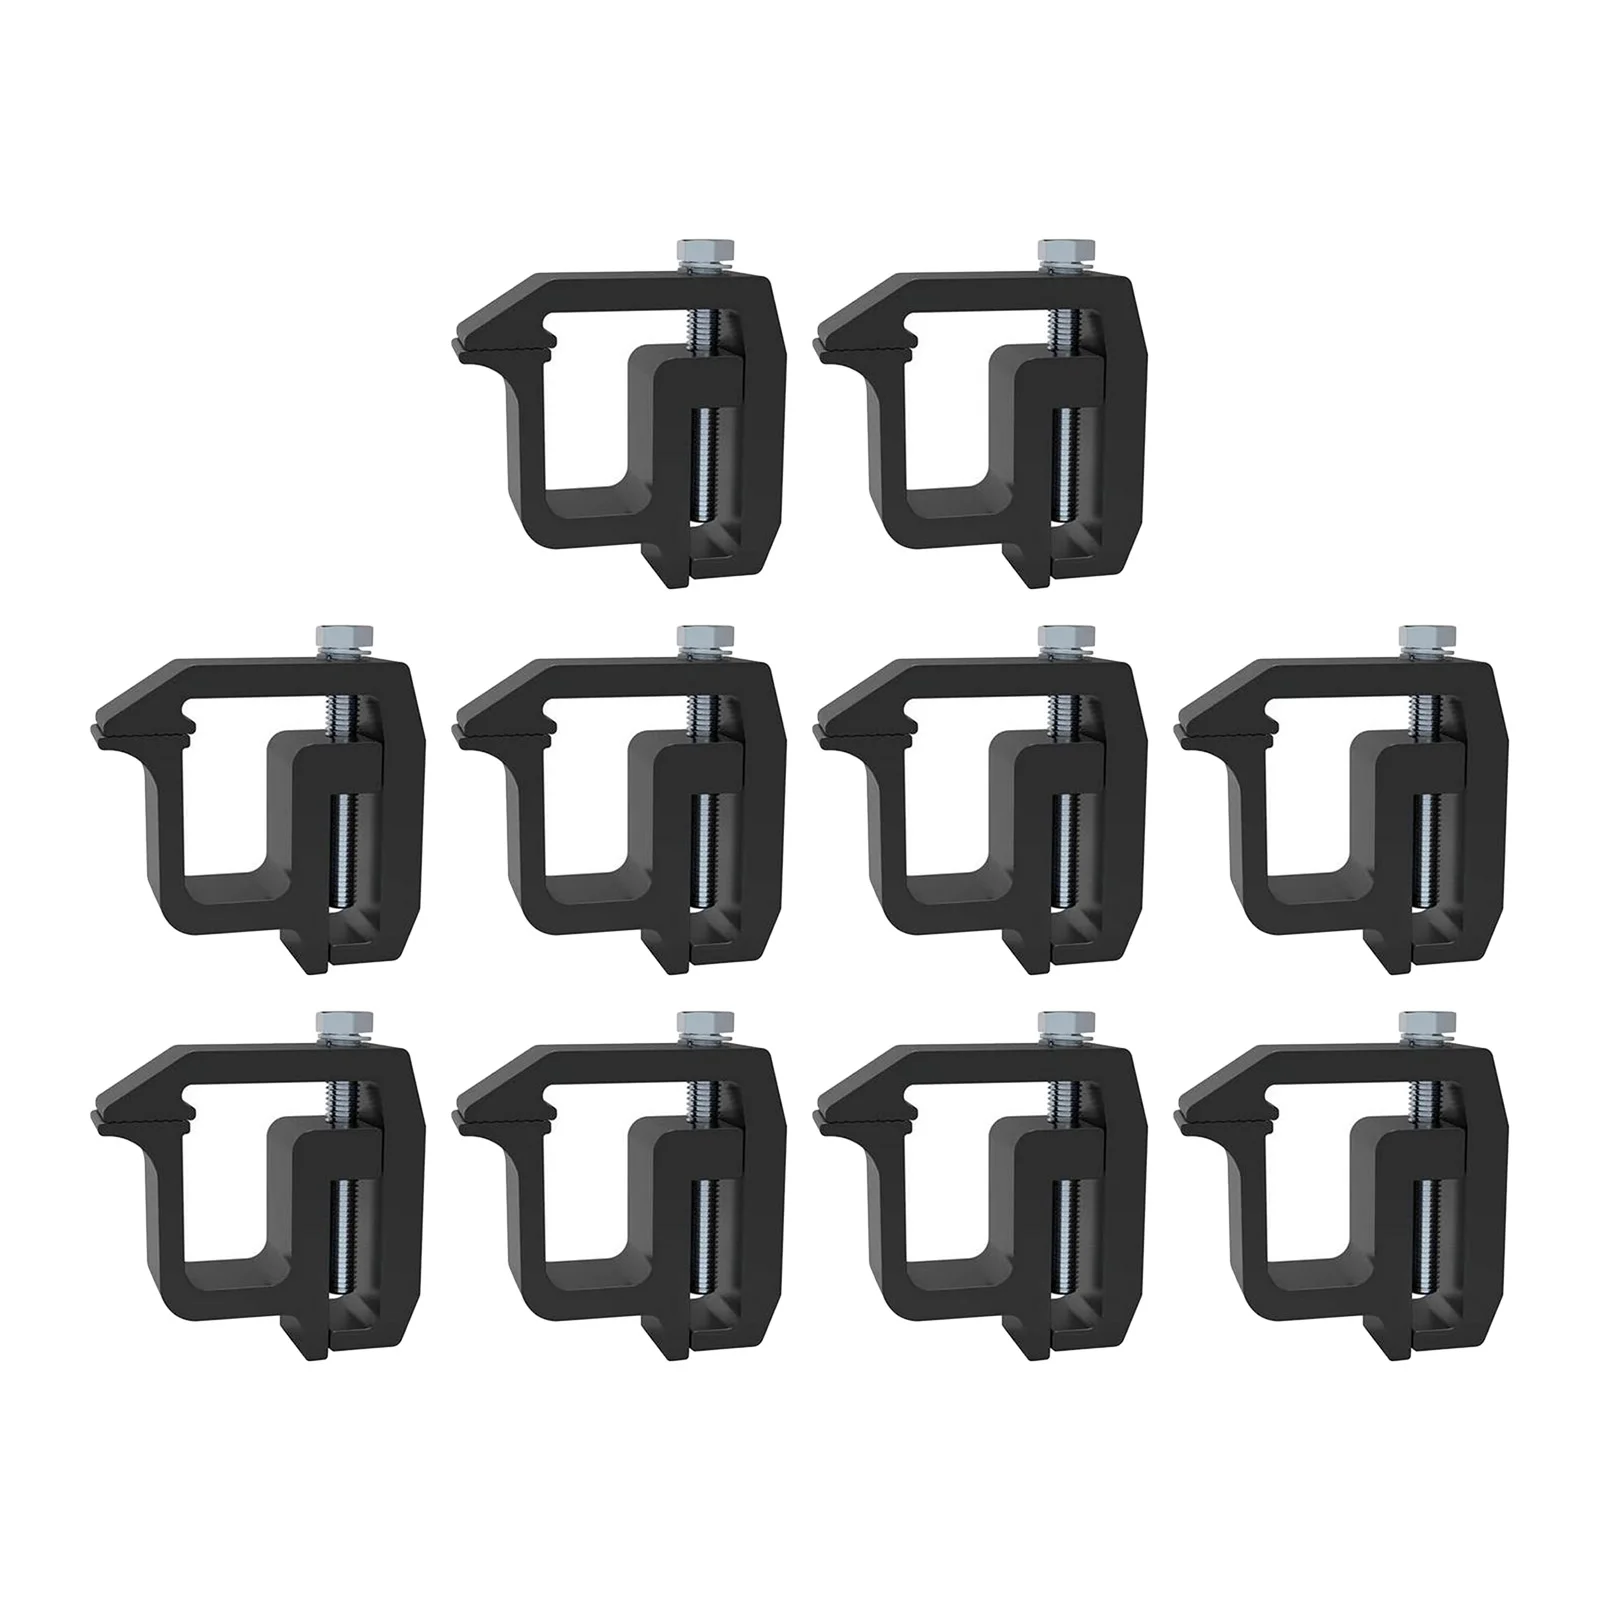 Aluminum Mounting Clamps Heavy Duty for Chevy 1500 2500 3500 and More Pick-up Truck Models Truck Bed Accessories Black